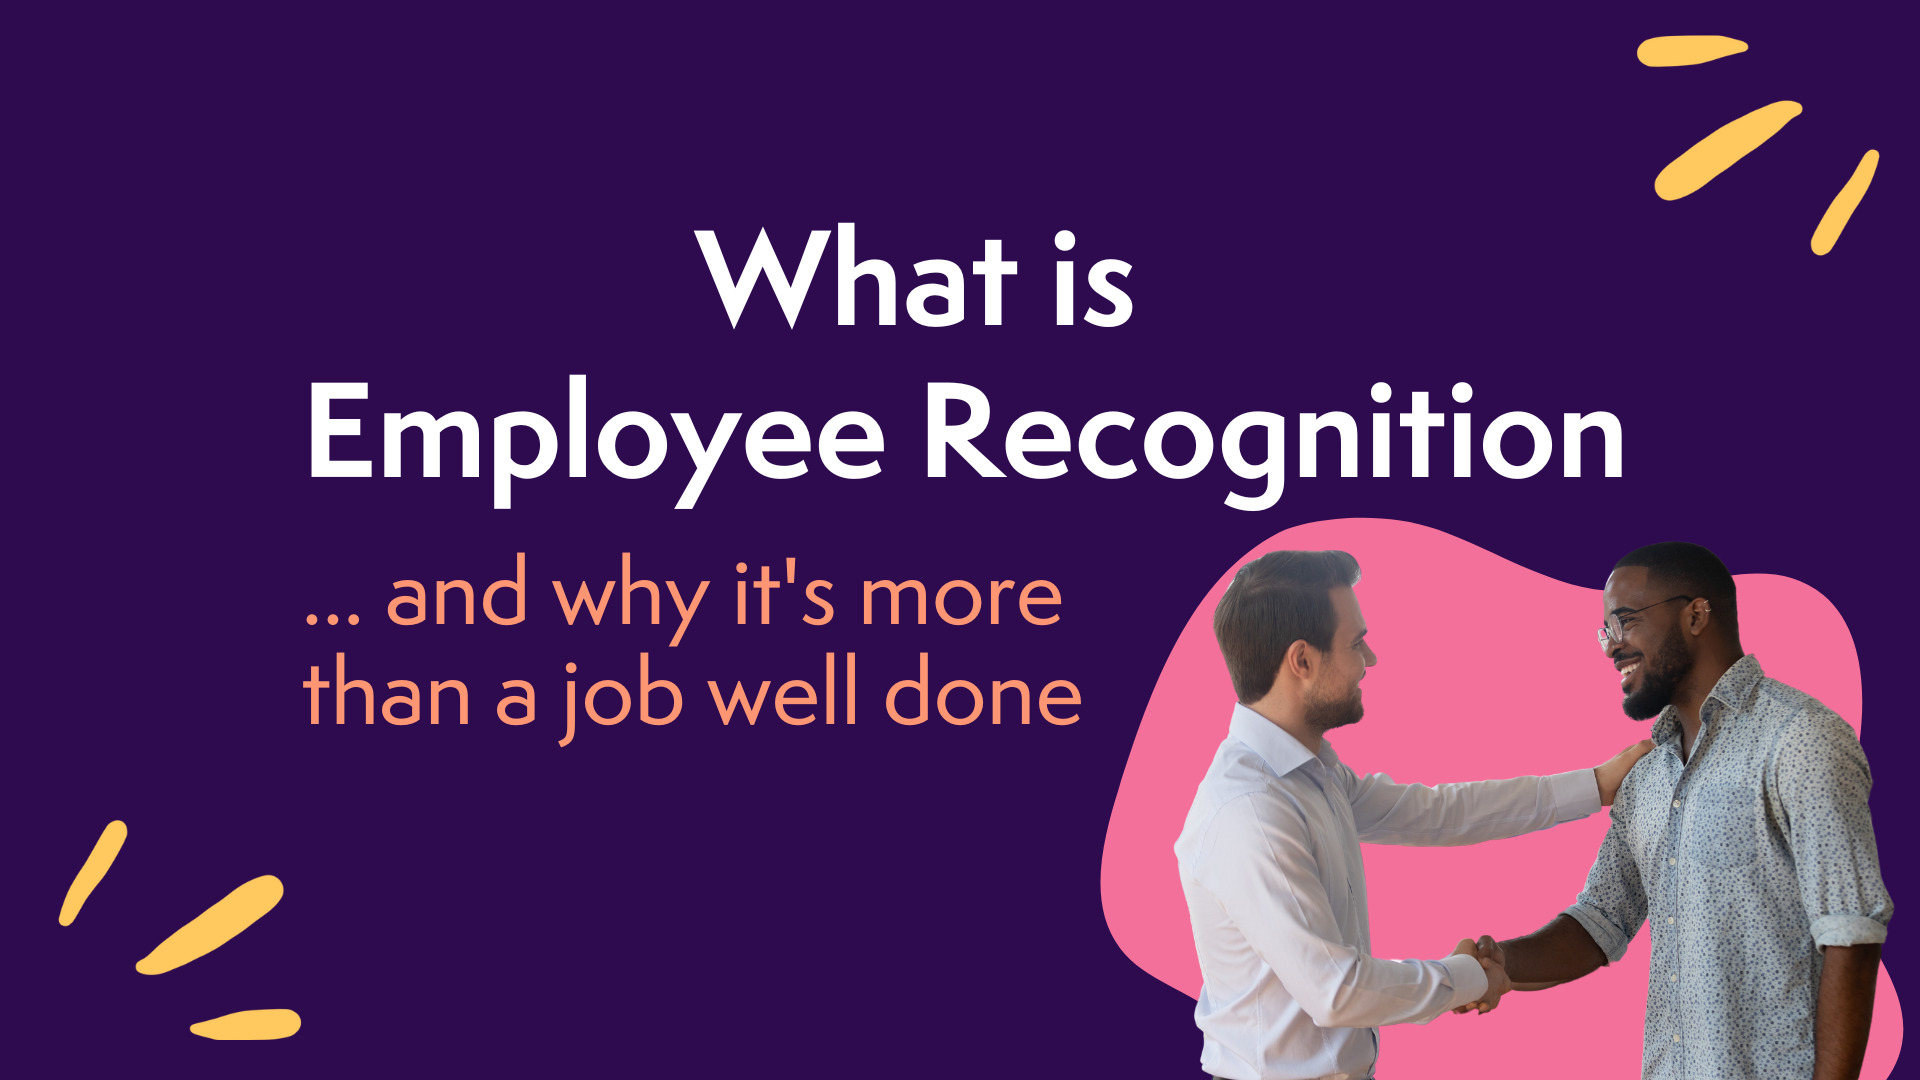 What Is Employee Recognition and Why It’s More Than a Job Well Done